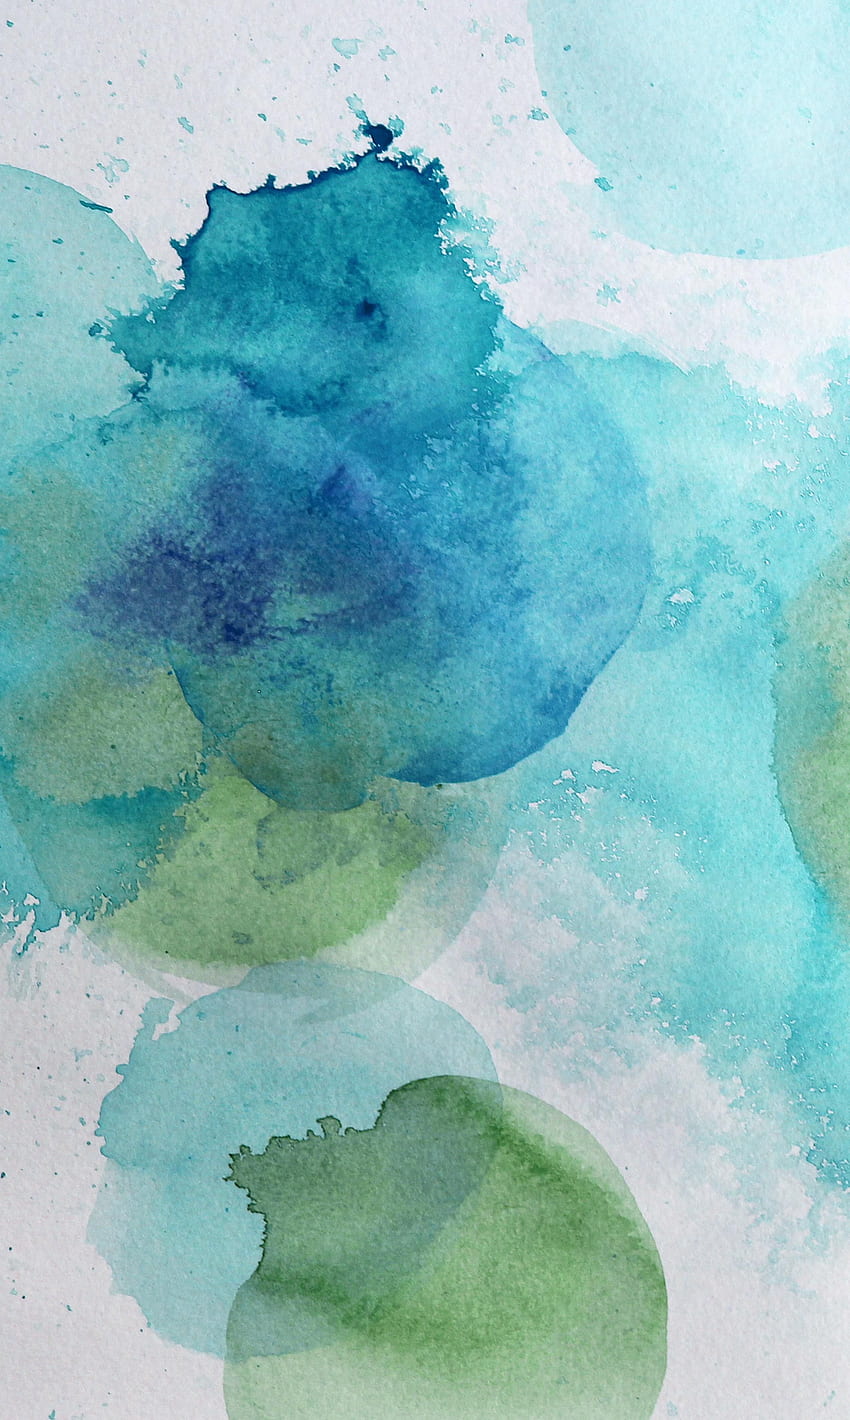 Abstract Watercolor Print Poster of Blues and Greens ในปี 2020 พื้นหลังสีน้ำ, สีน้ำ, สีน้ำ, สีน้ำ วอลล์เปเปอร์โทรศัพท์ HD